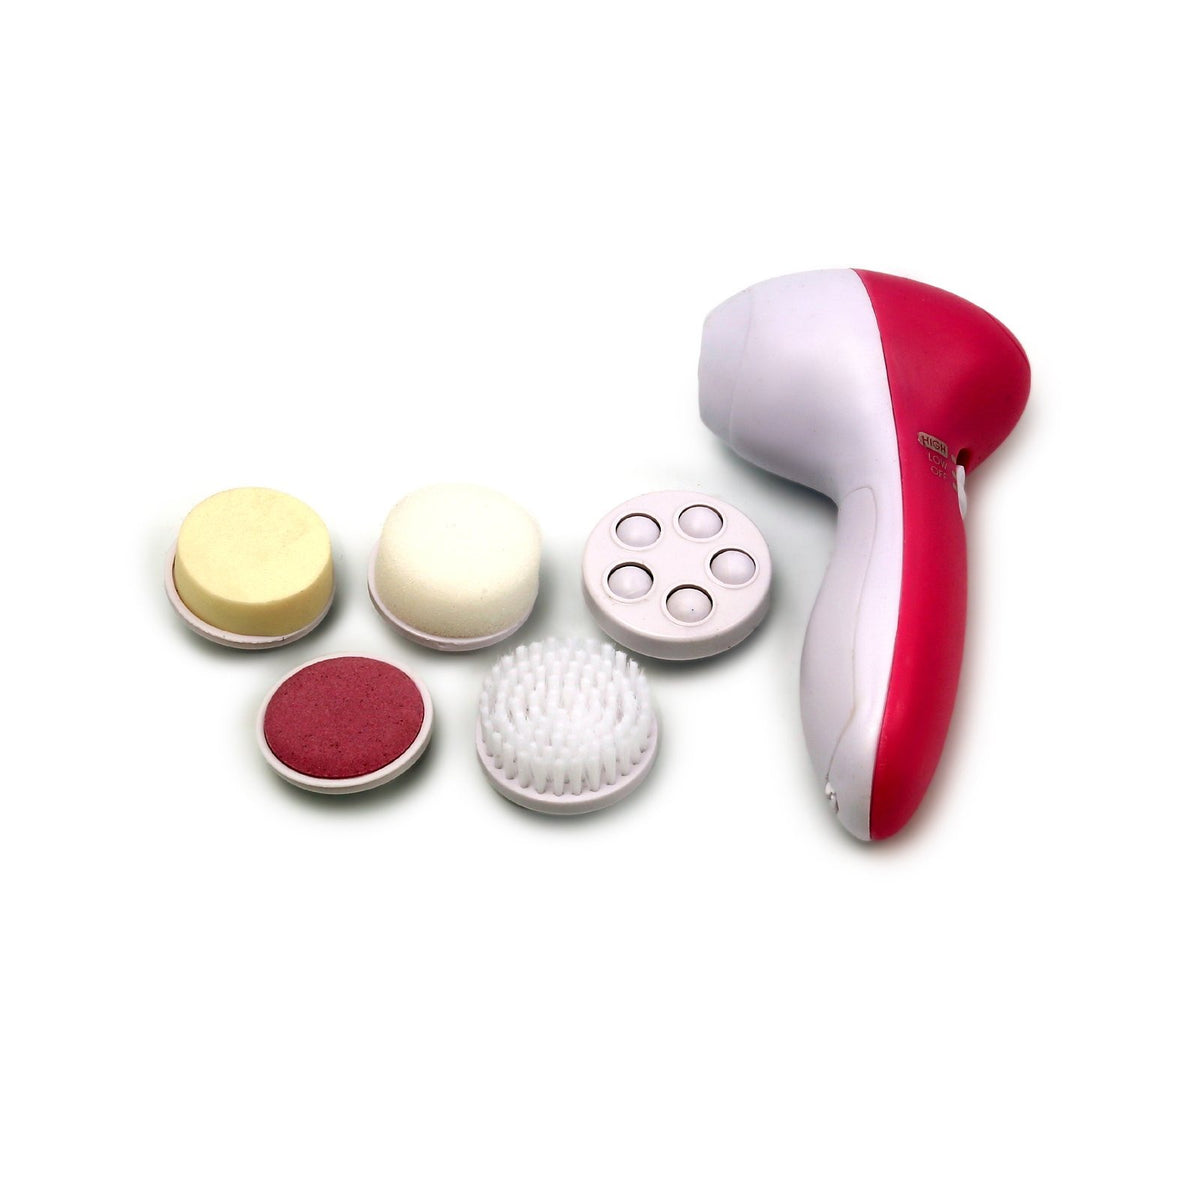 Beauty Care Massager 5 in 1 AA Battery Operated Batteries Not Included freeshipping - lasertag.pk